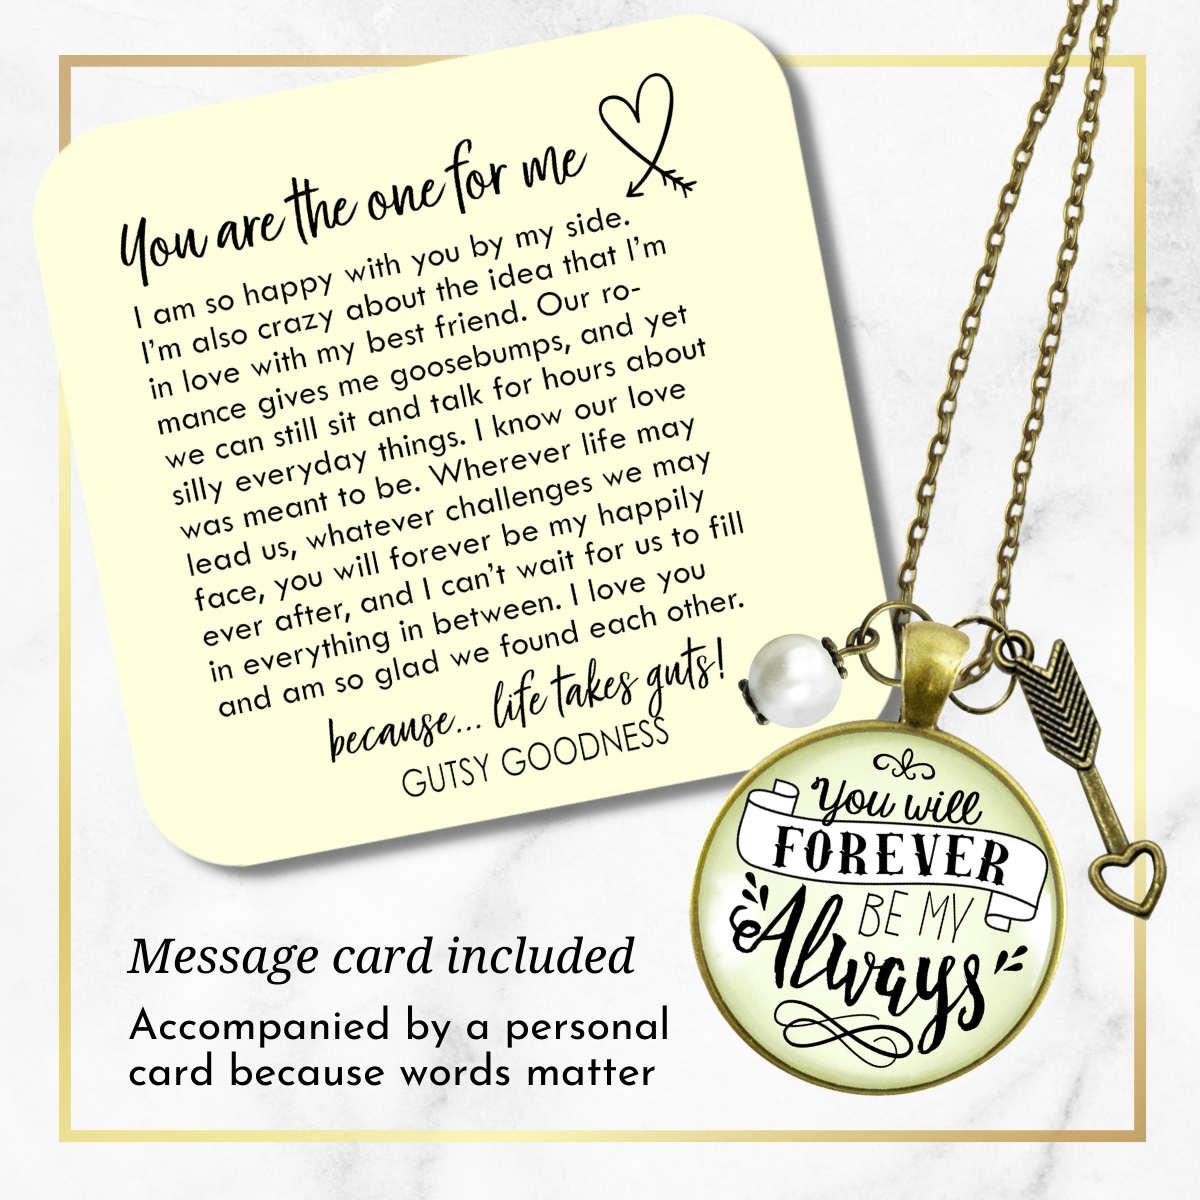 Gutsy Goodness You Will Forever be My Always Love Necklace for Girlfriend Wife Gift - Gutsy Goodness;You Will Forever Be My Always Love Necklace For Girlfriend Wife Gift - Gutsy Goodness Handmade Jewelry Gifts